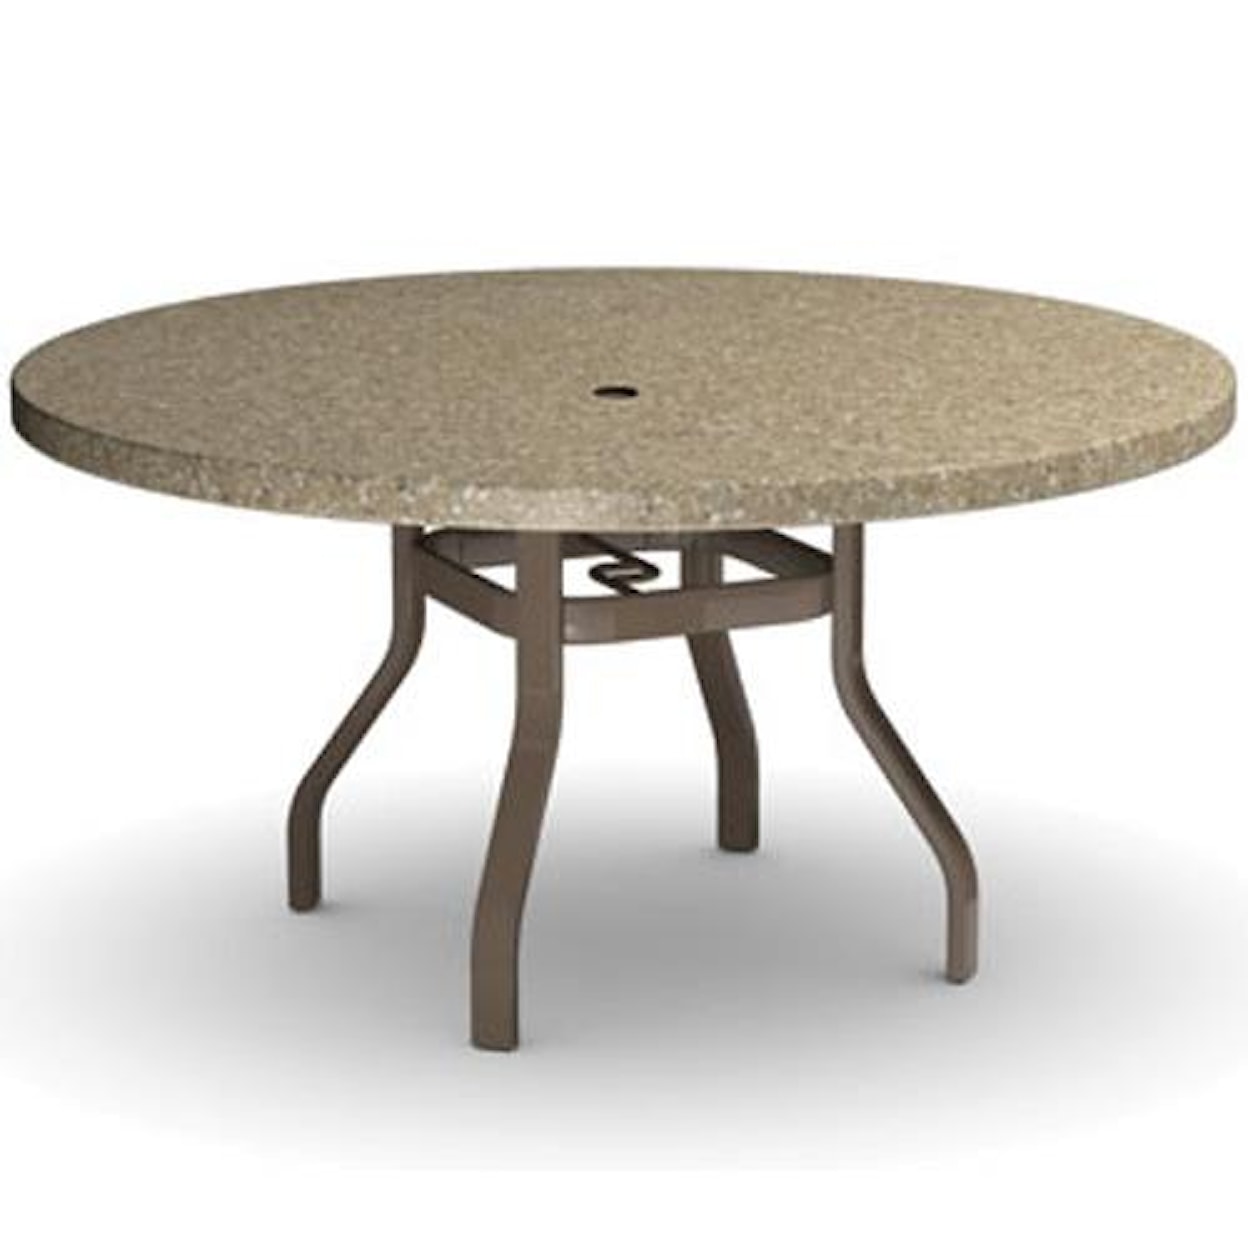 Homecrest Stonegate 42" Round Dining Table with Umbrella Hole